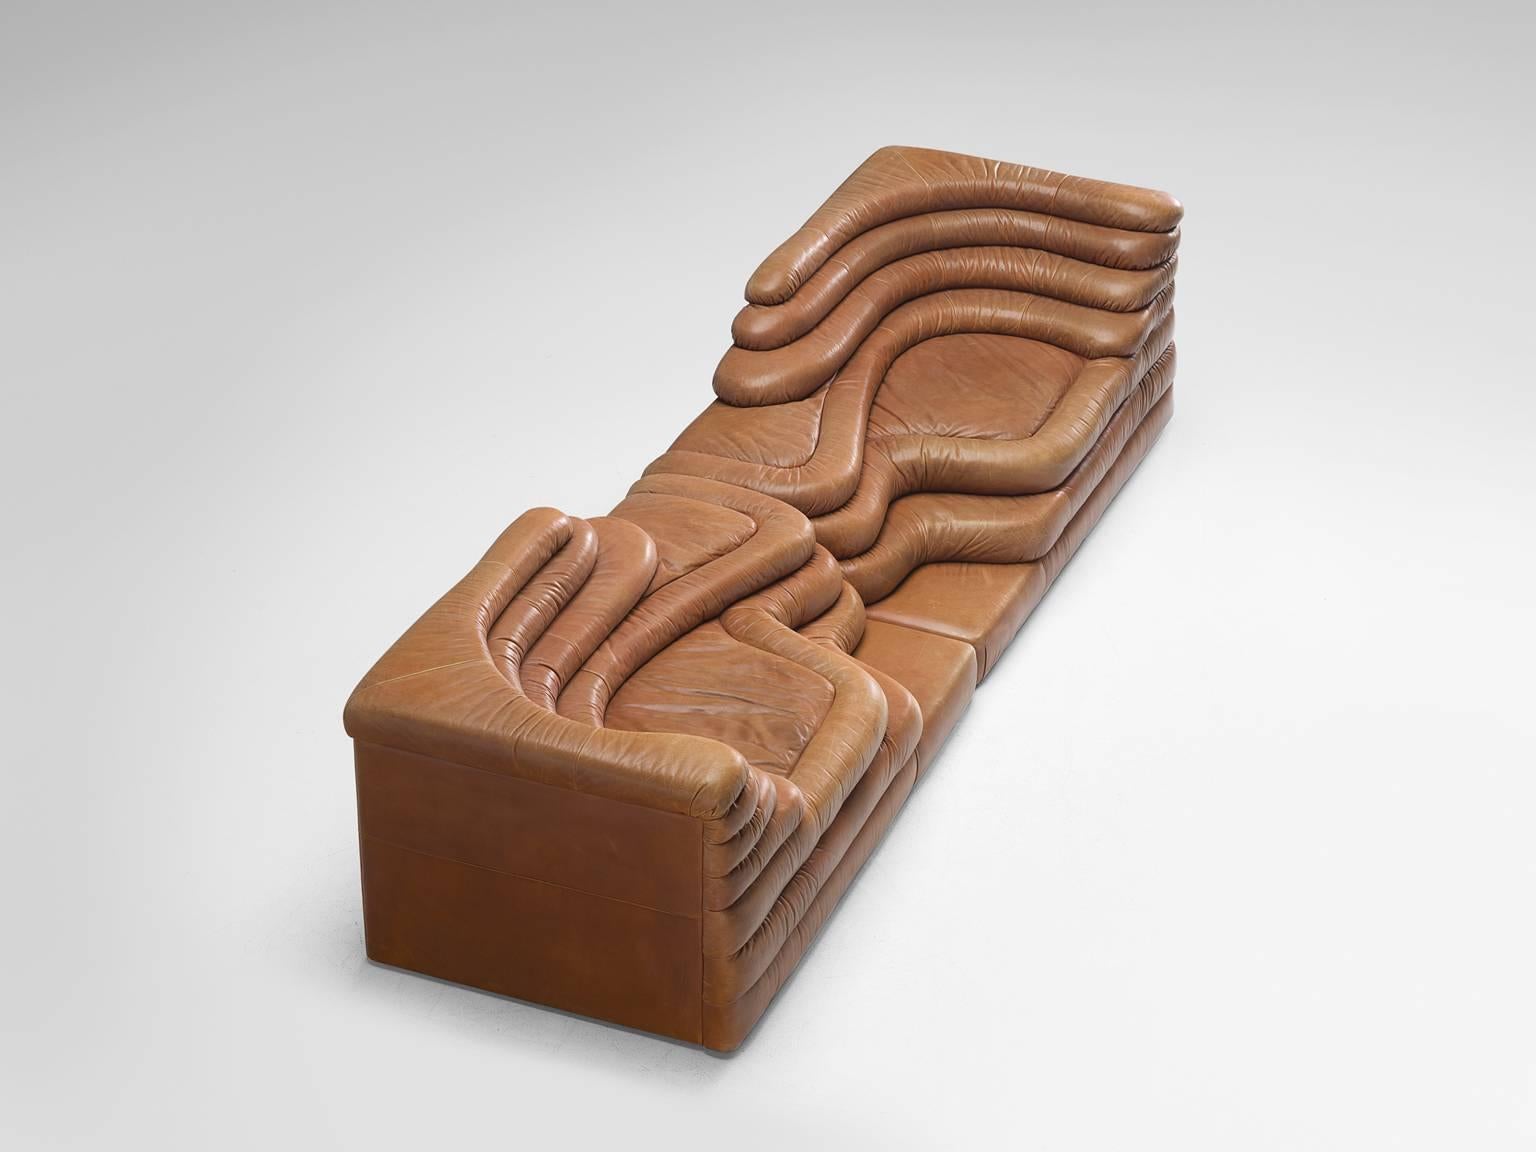 Pair of DS1025 'Terrazza' landscape elements, in cognac leather, by Ubald Klug for De Sede, Switzerland, 1970s. 

Waterfall shaped sofa in cognac leather by the Swiss manufacturer De Sede. The leather is in outstandingly good patinated condition.